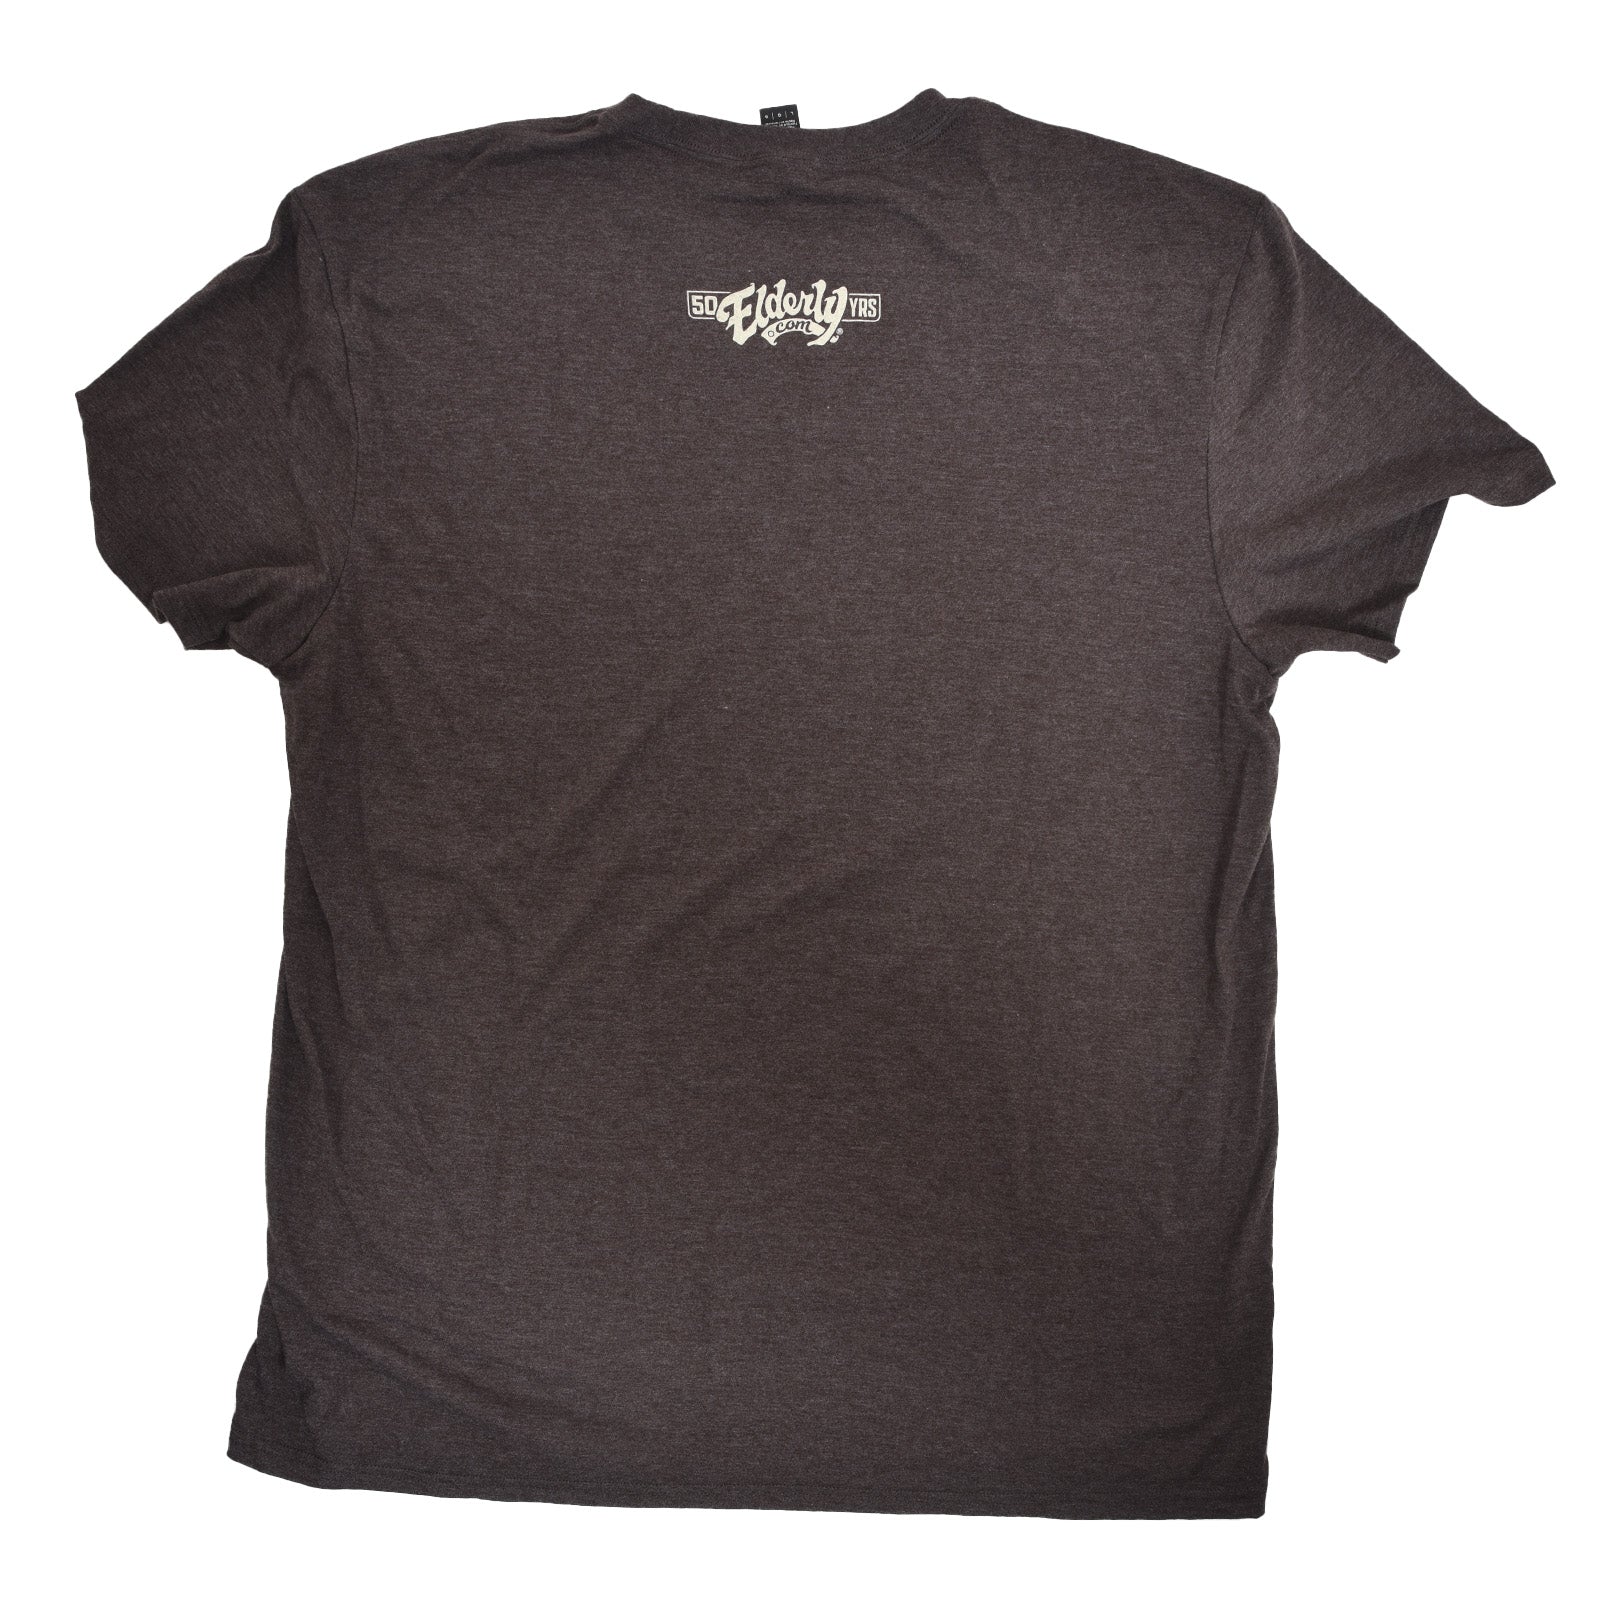 Image 3 of ELDERLY 50TH ANNIVERSARY LOGO TEE HEATHERED BROWN (VARIOUS SIZES)- SKU# TEE89-HB-S : Product Type Accessories & Parts : Elderly Instruments